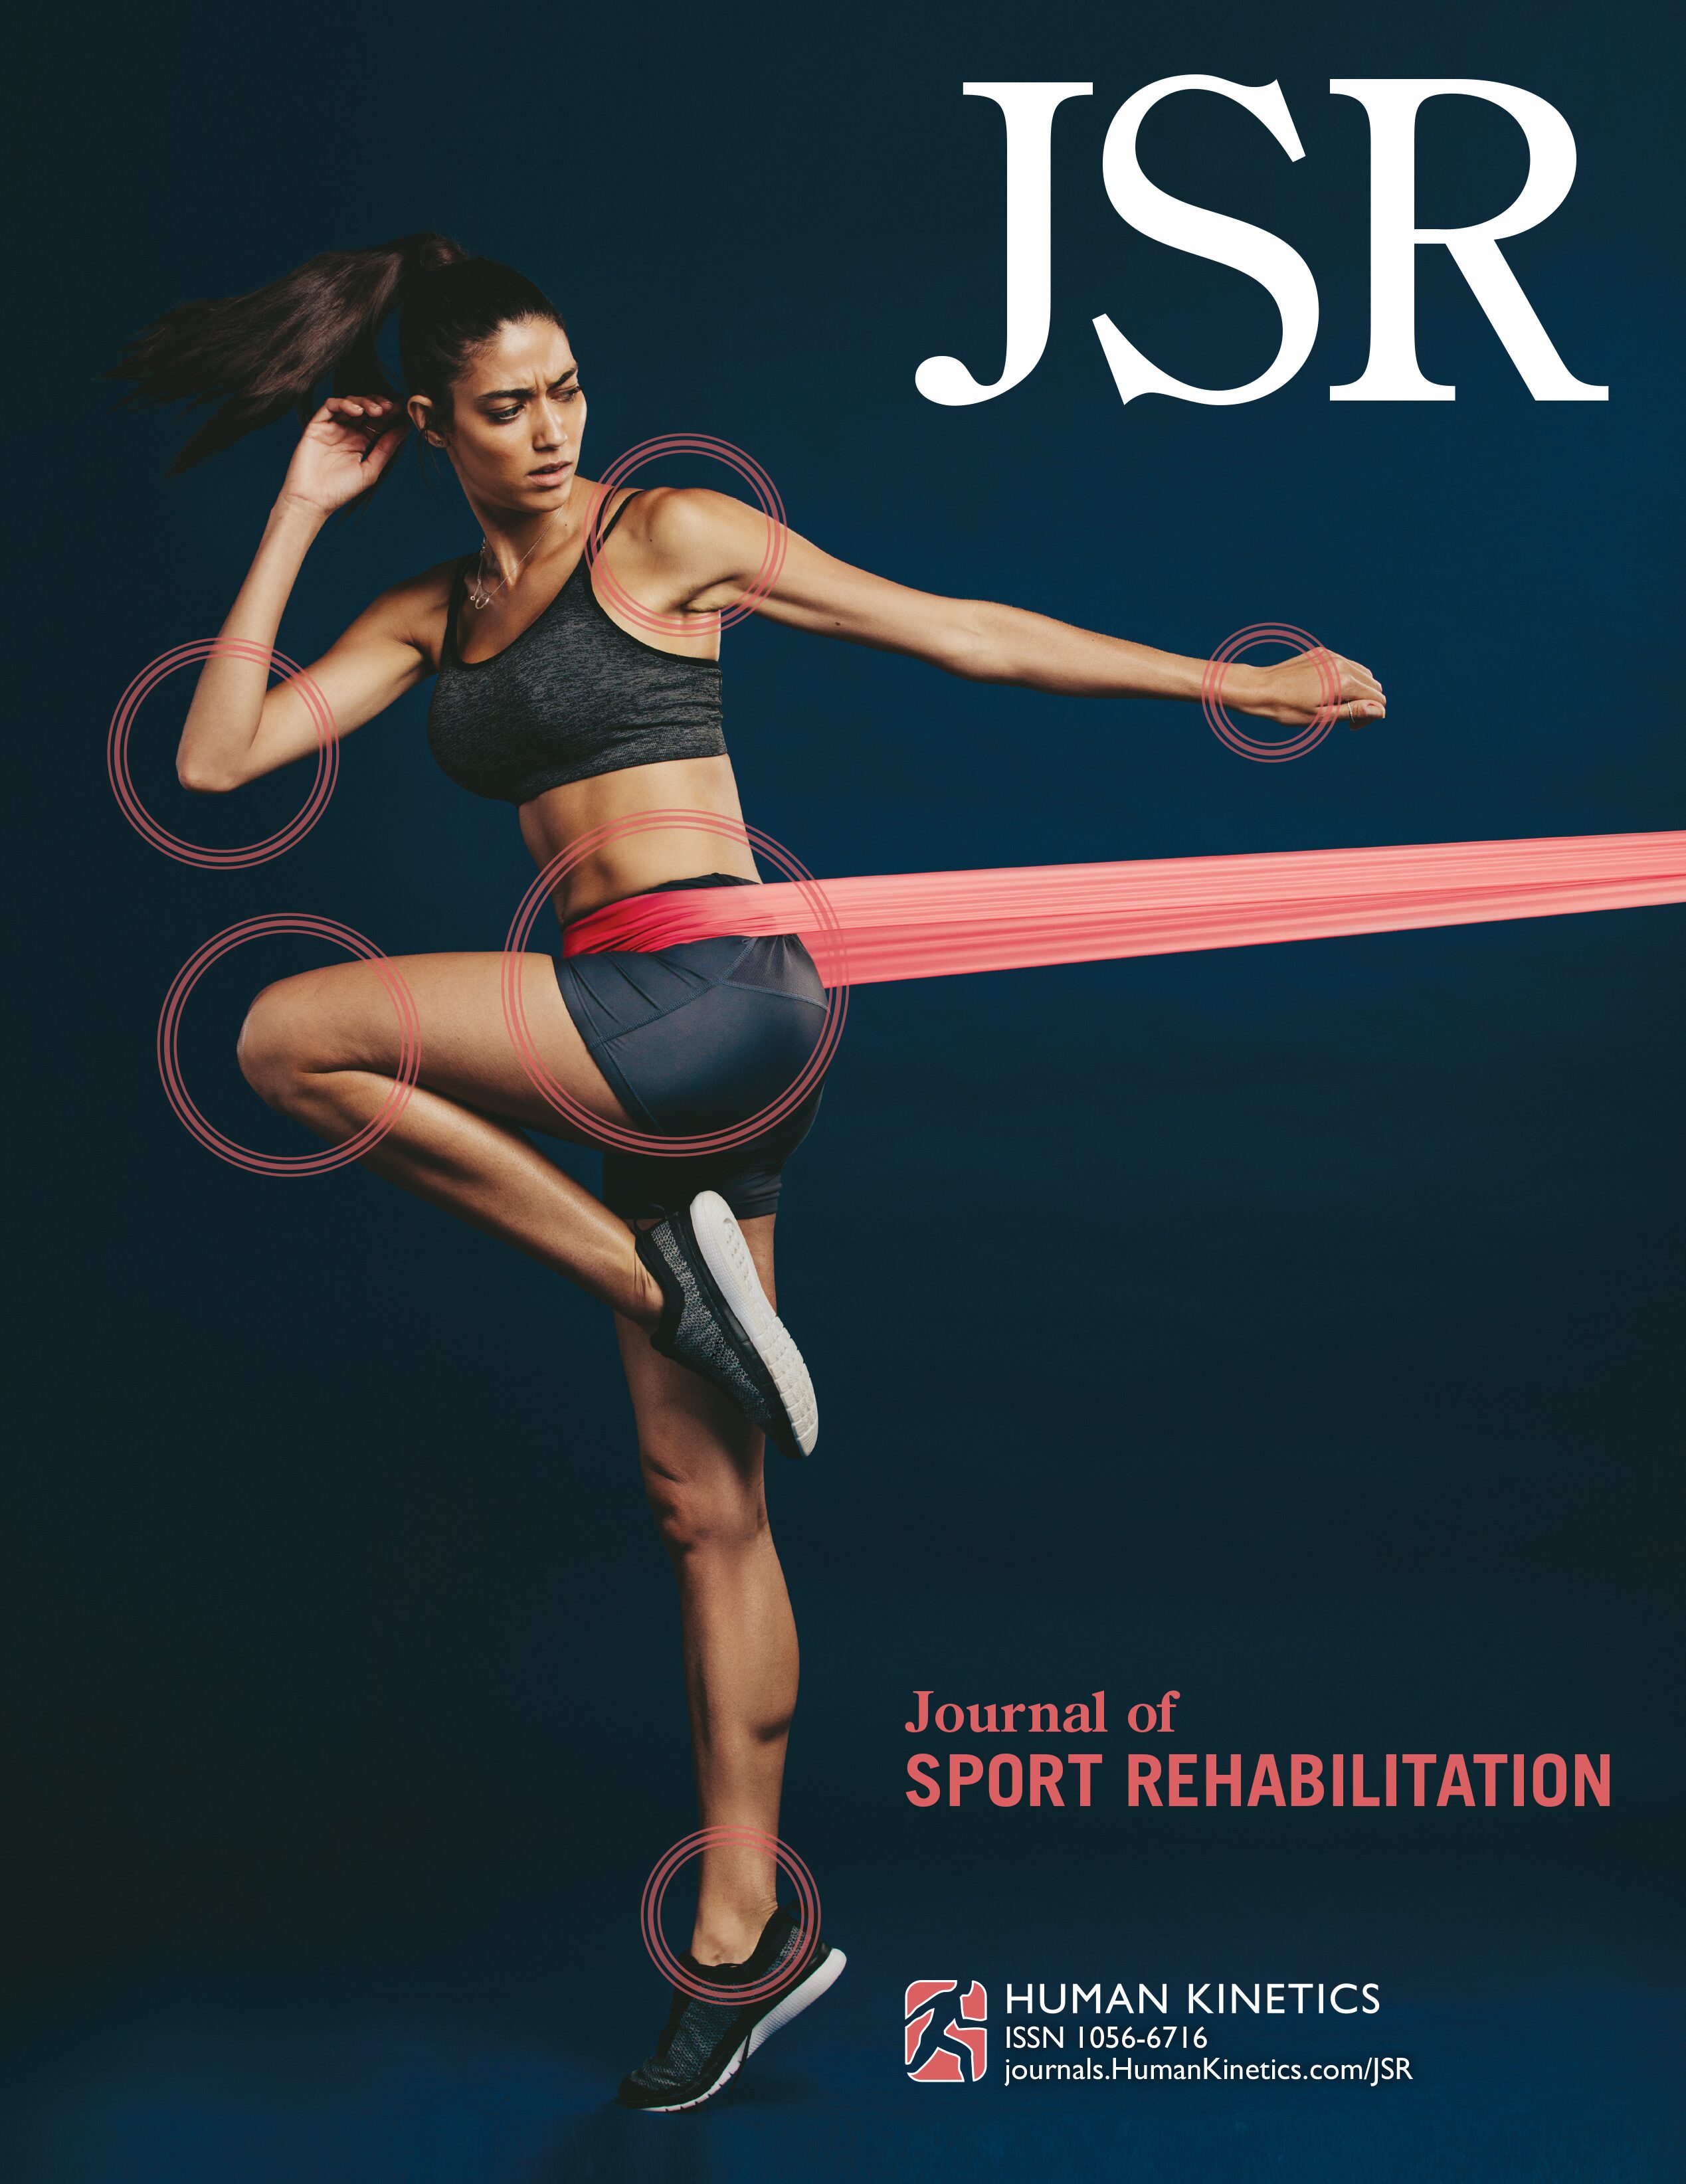 Closed-Loop Reflex Responses of the Lateral Ankle Musculature From Various Thresholds During a Lateral Ankle Sprain Perturbation